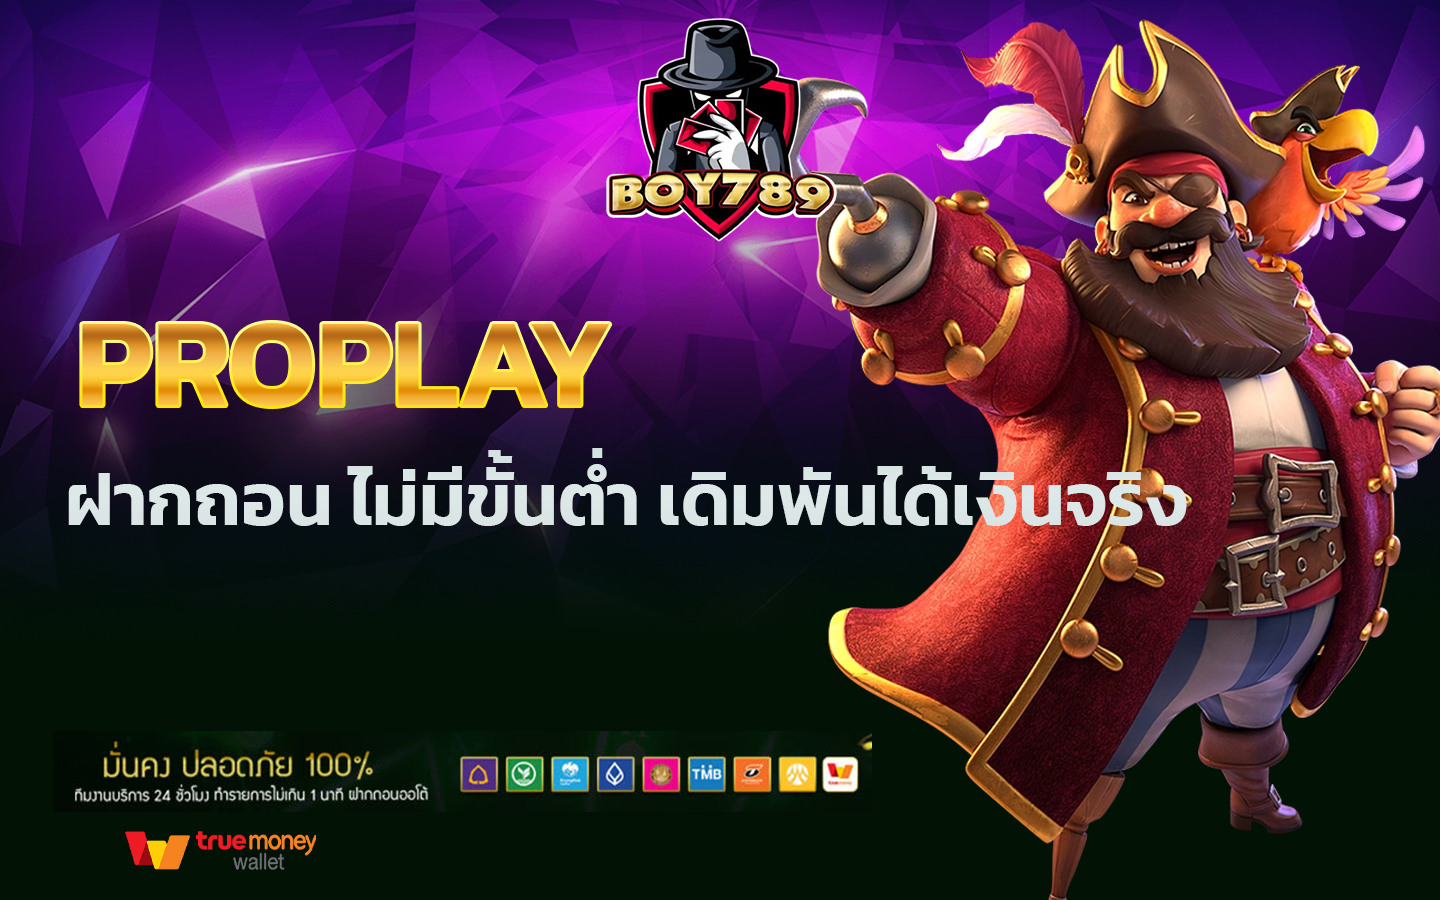 proplay